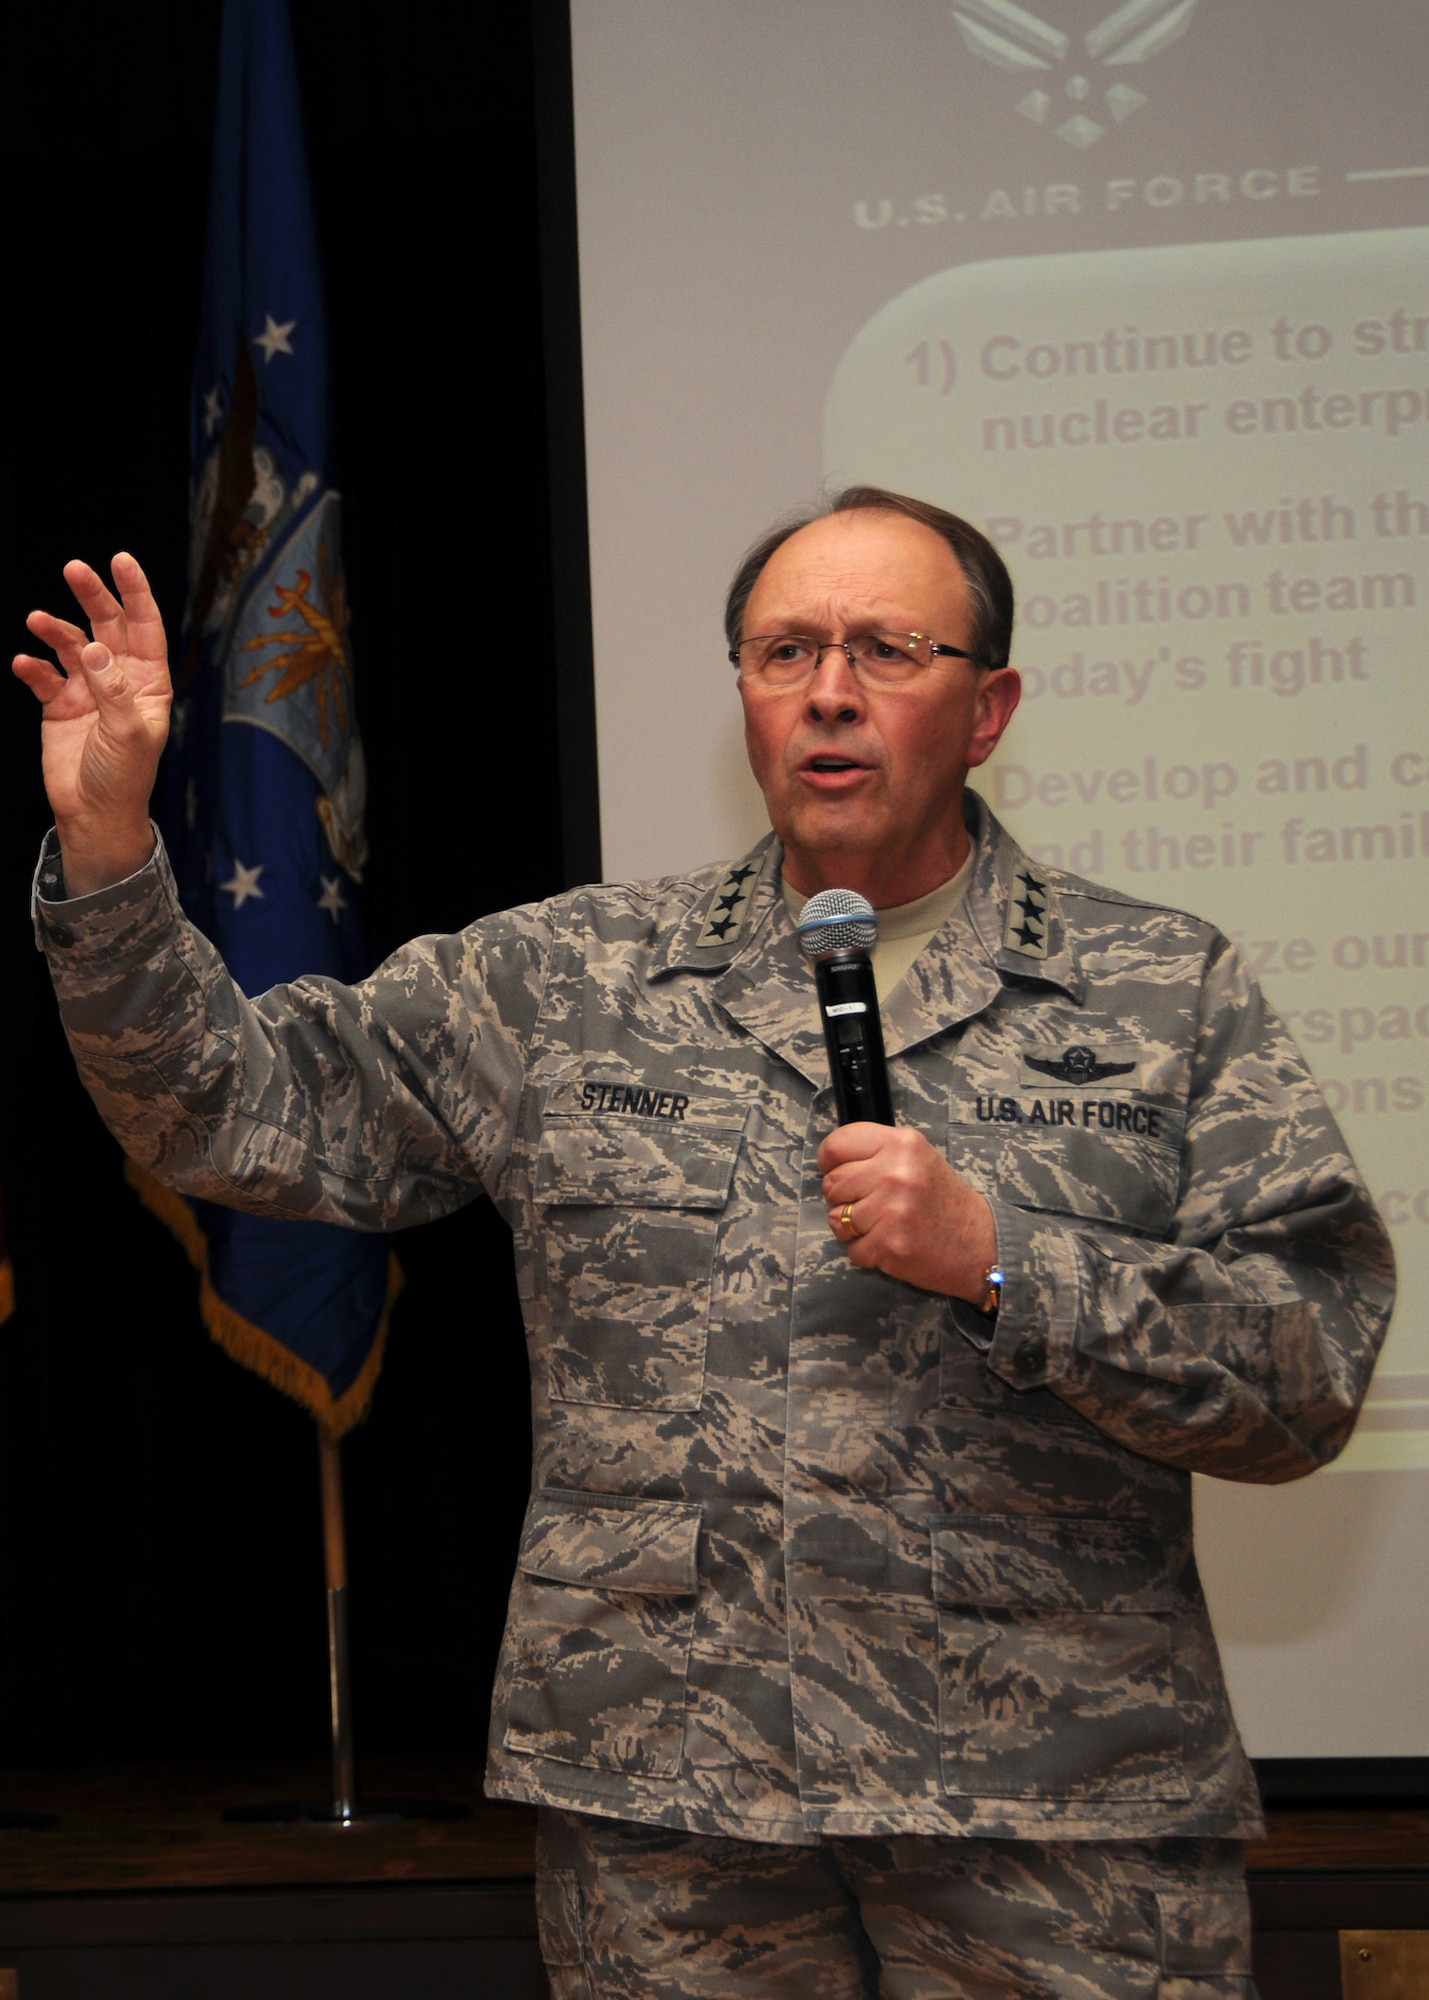 Lt. Gen. Charles E. Stenner, Jr., commander, Air Force Reserve Command, discusses Air Force priorities with the men and women of the 944th Fighter Wing during a townhall meeting at Luke Air Force Base, Ariz., Sunday. (U.S. Air Force Photo by Staff Sgt. Louis Vega) 